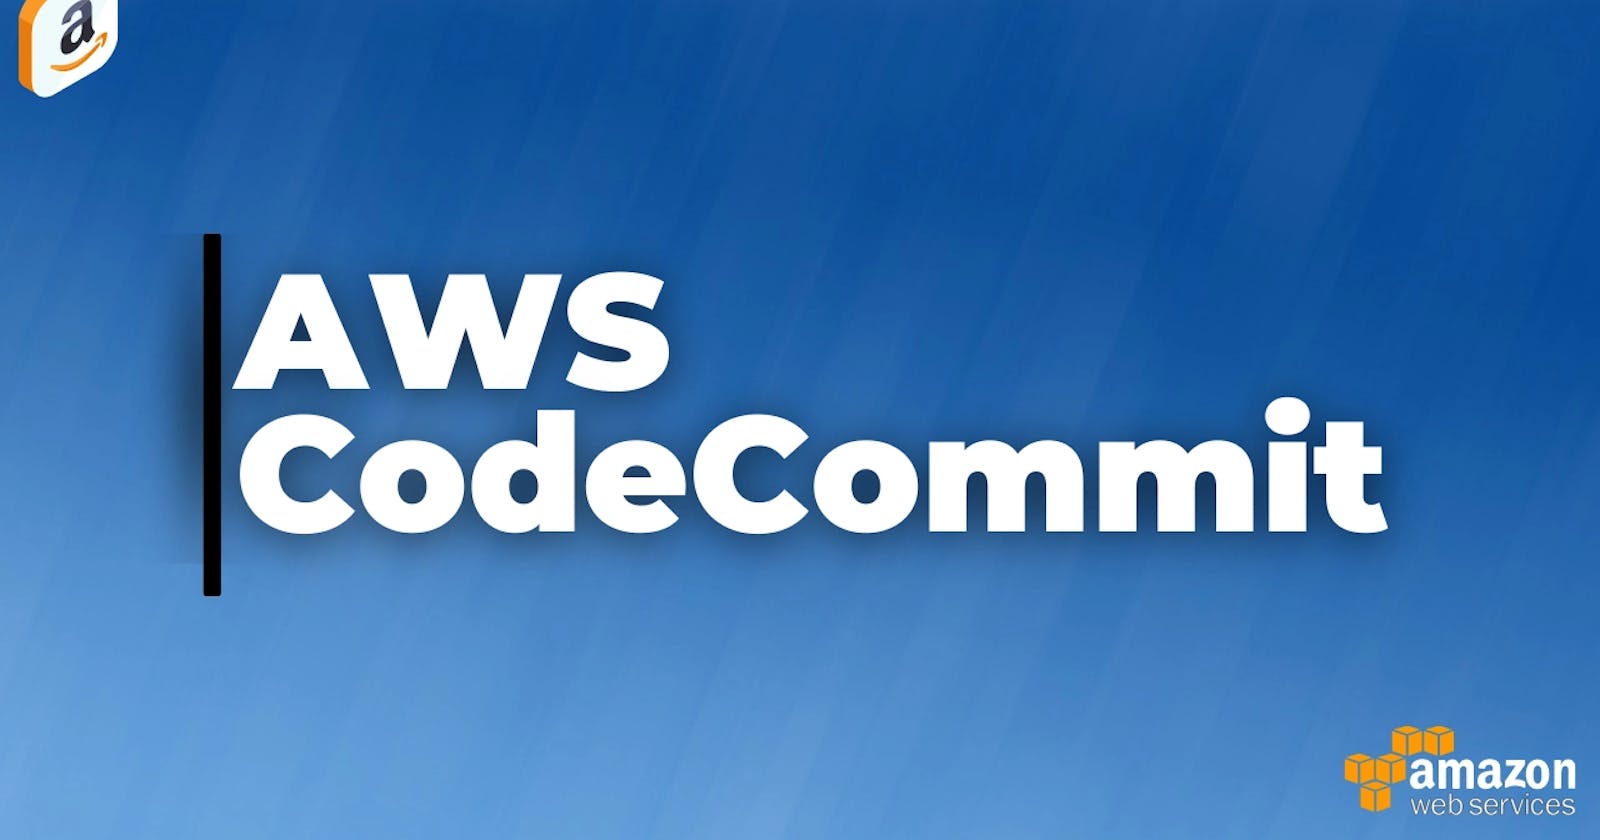 Getting Started with Amazon CodeCommit in AWS: A Simple Guide